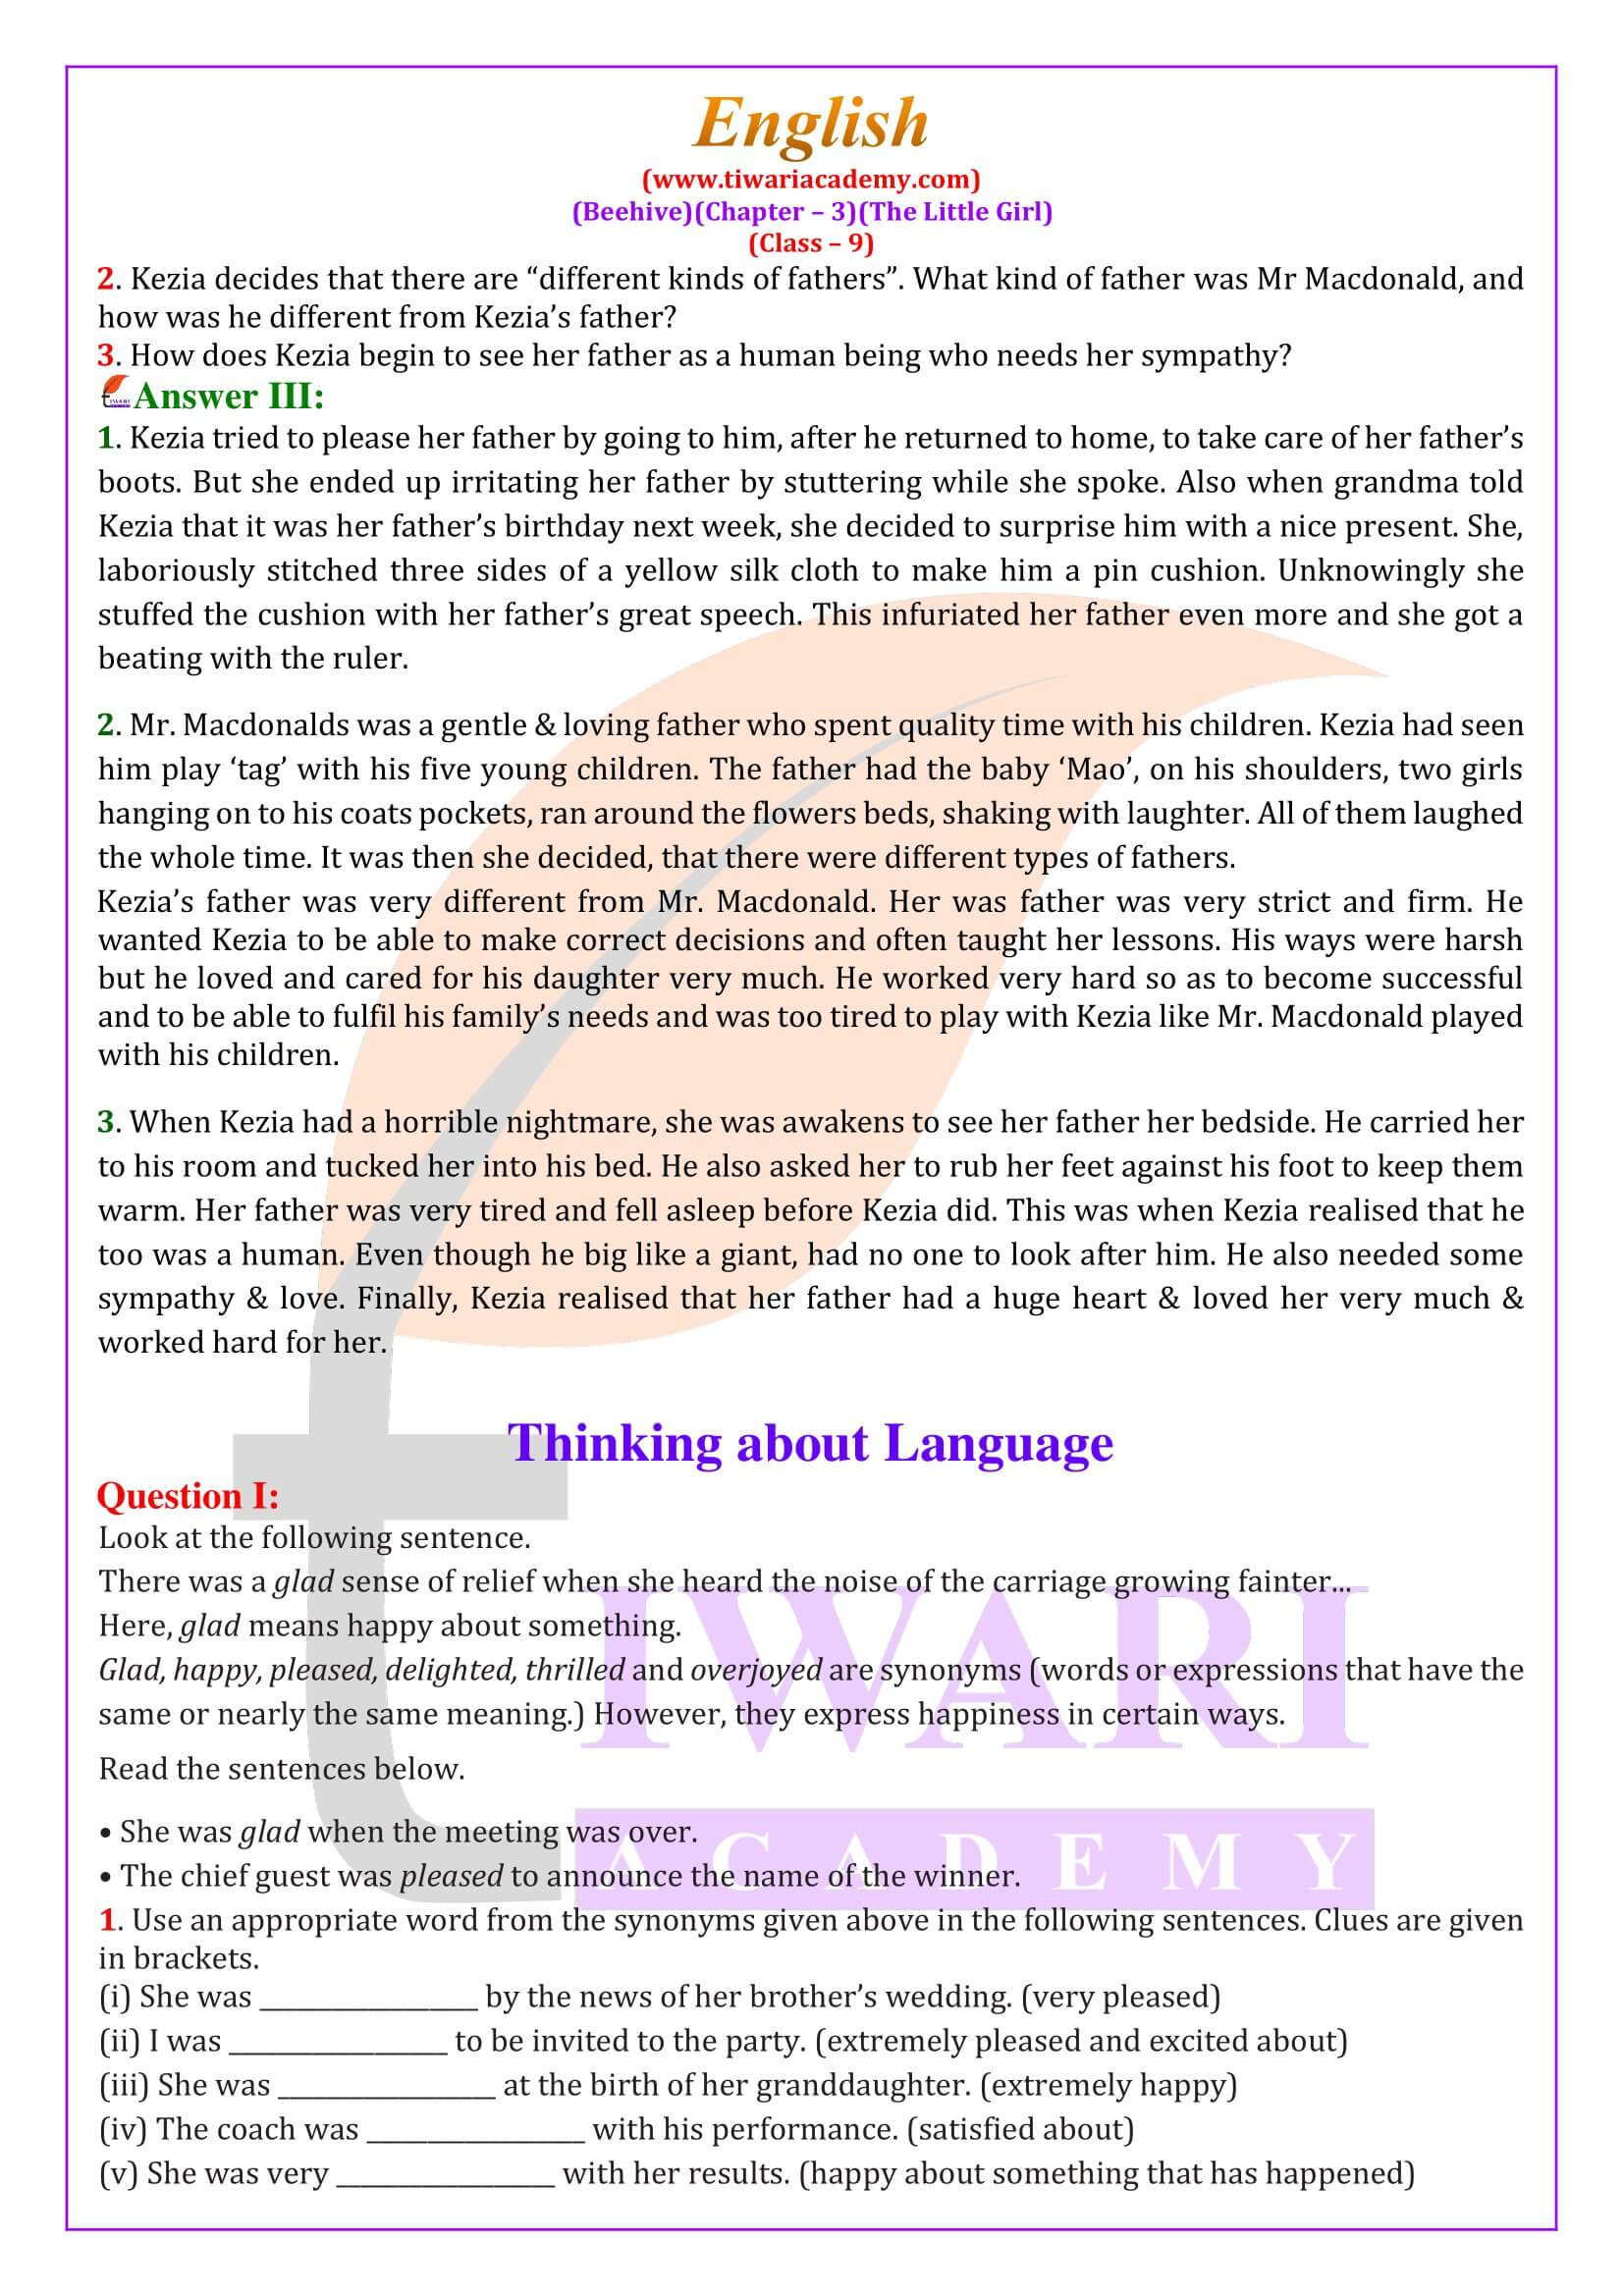 Class 9 English Beehive Chapter 3 The Little Girl Question Answers